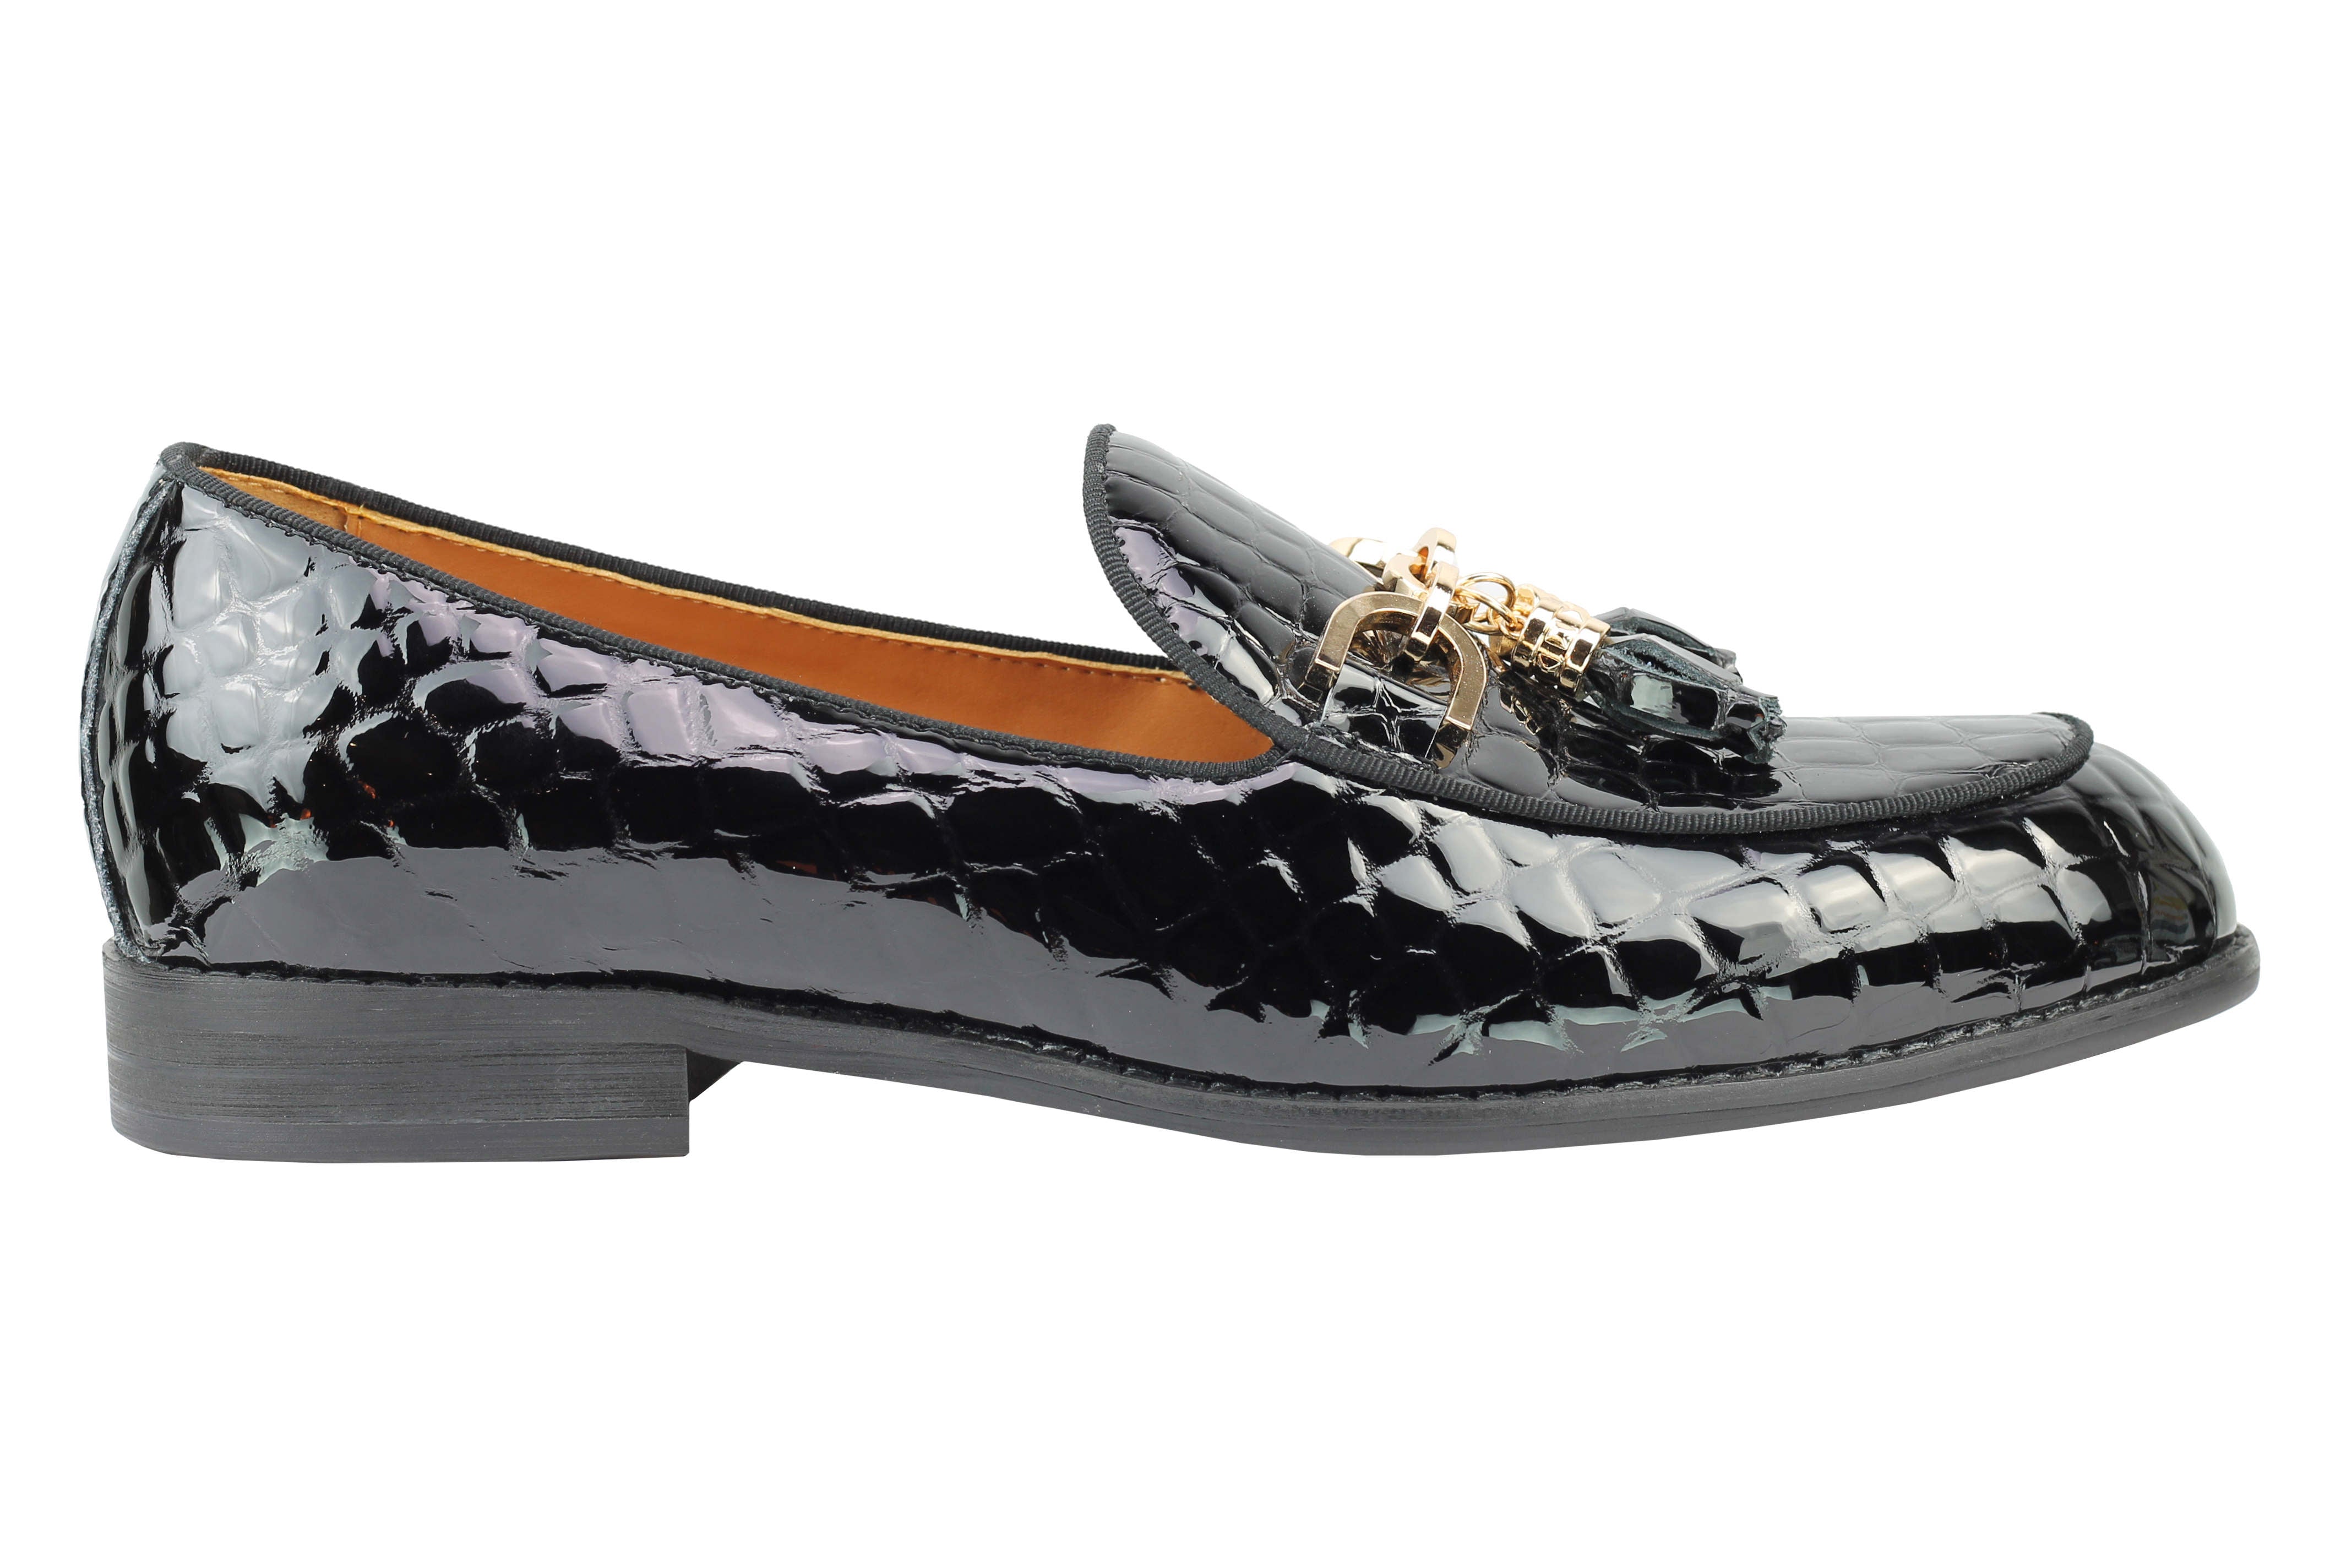 Real Leather Glossy Snake Print Tassel Loafers